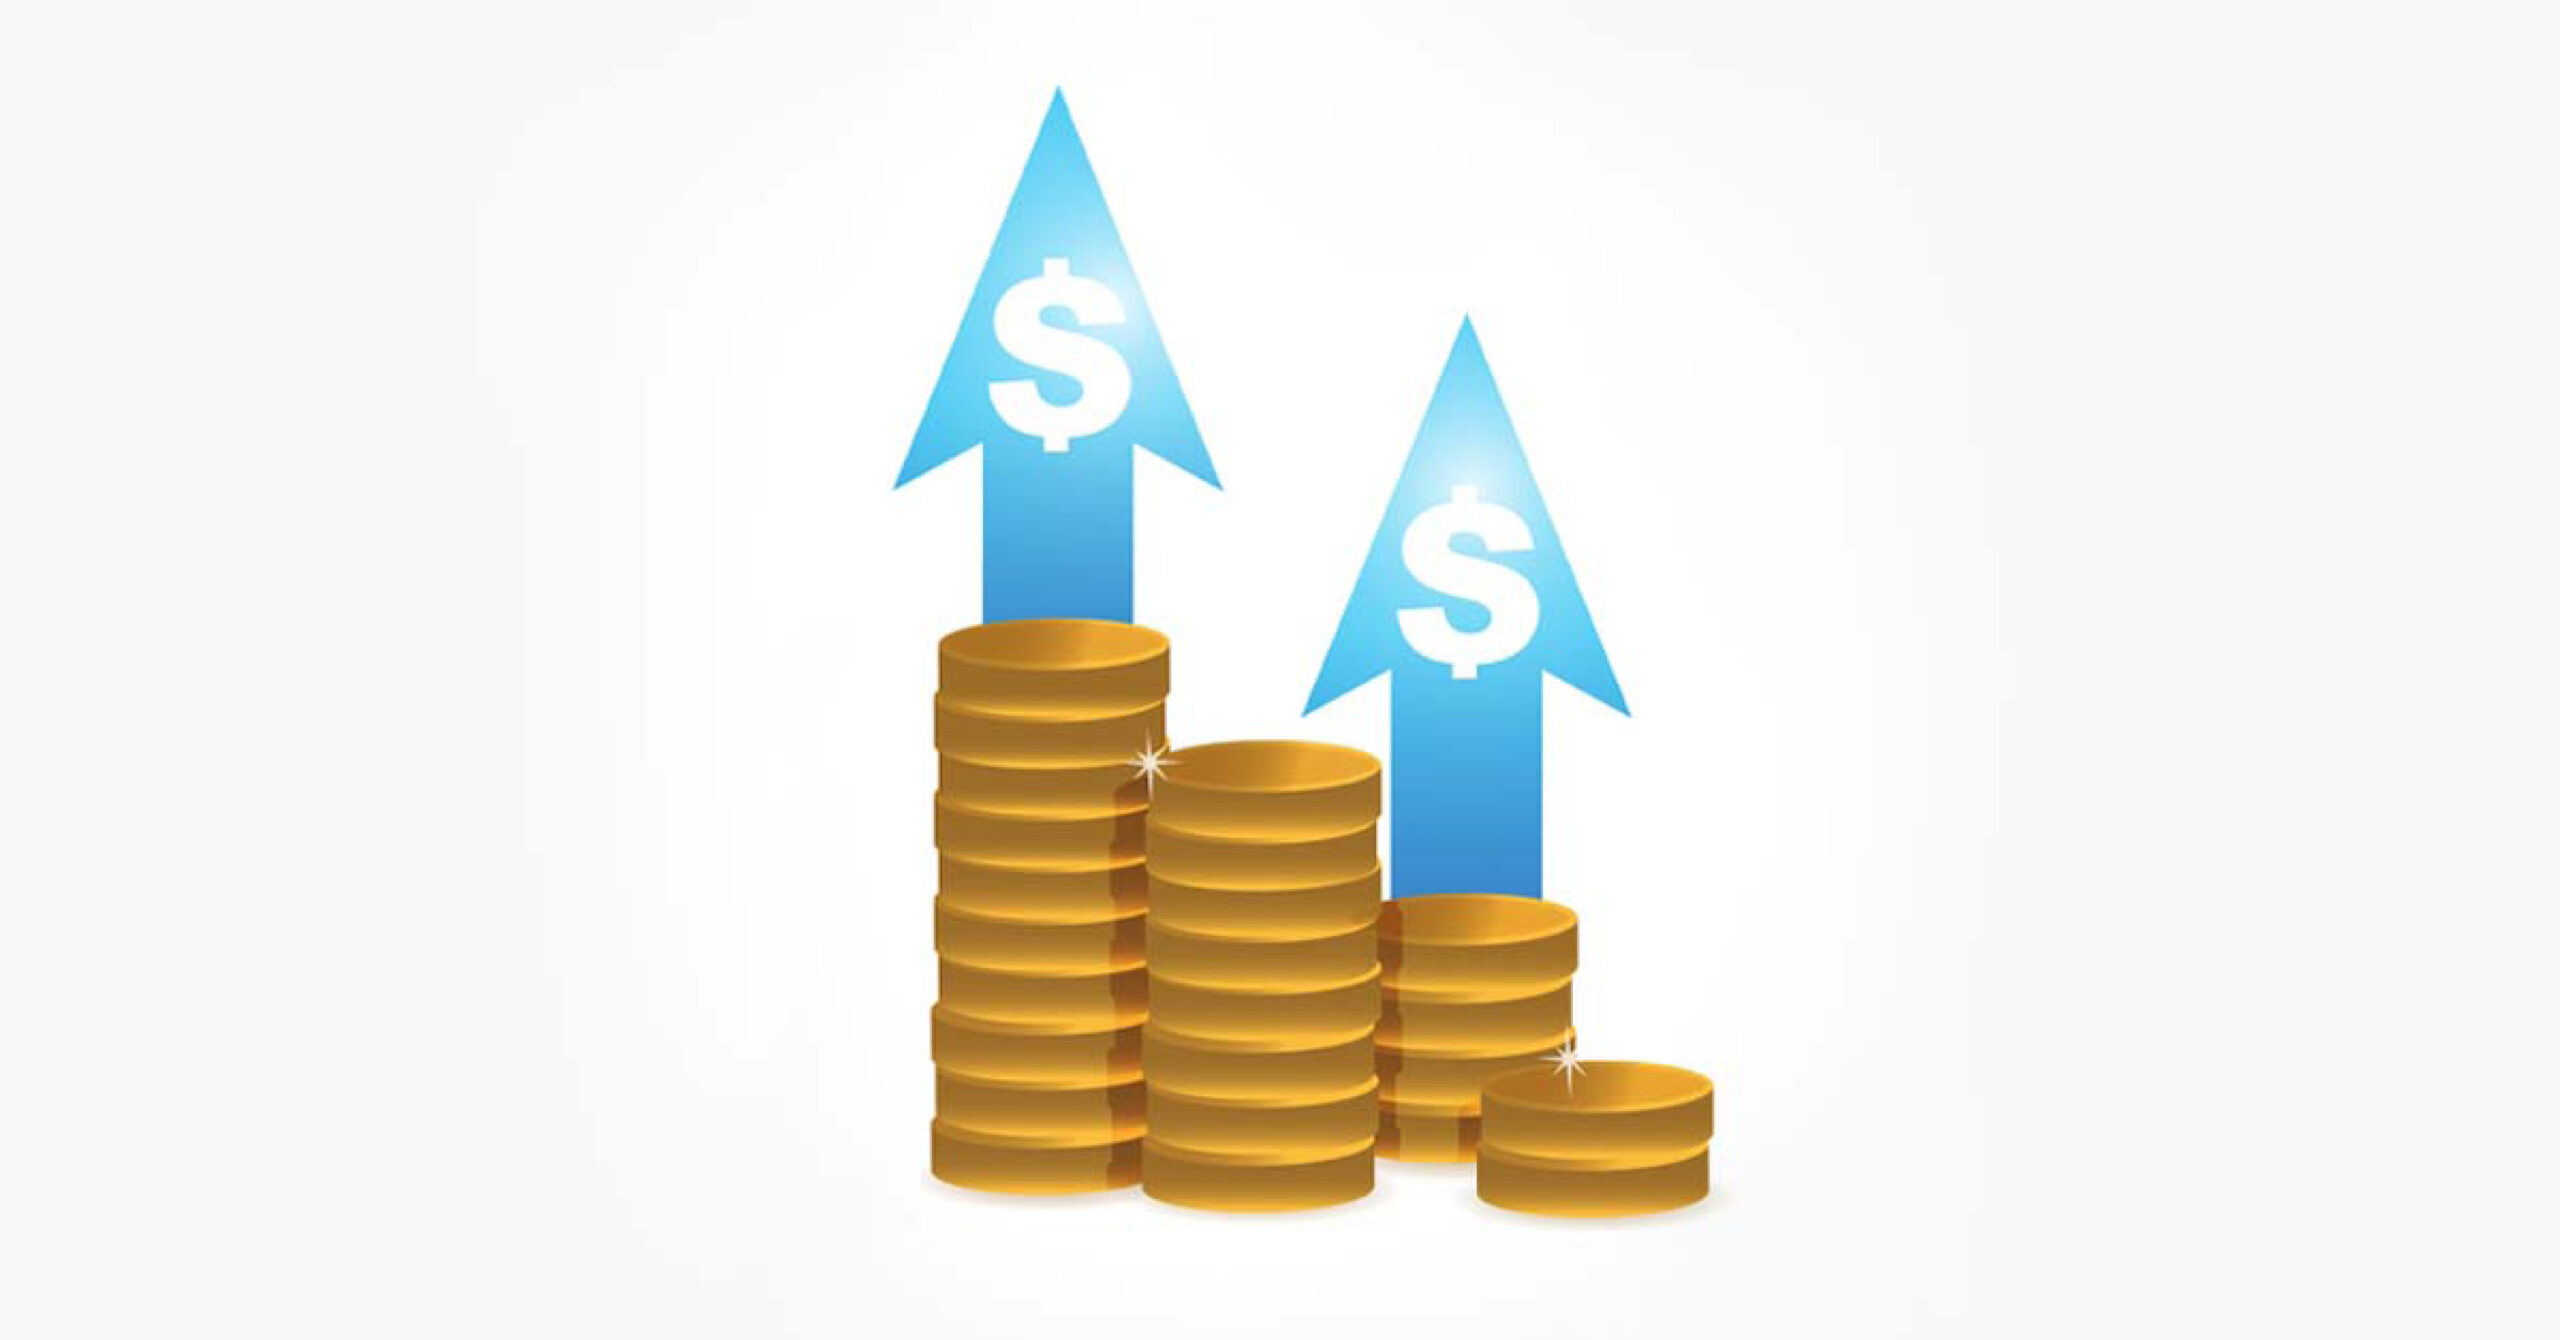 3 More Ways To Improve Cash Flow At Your Business